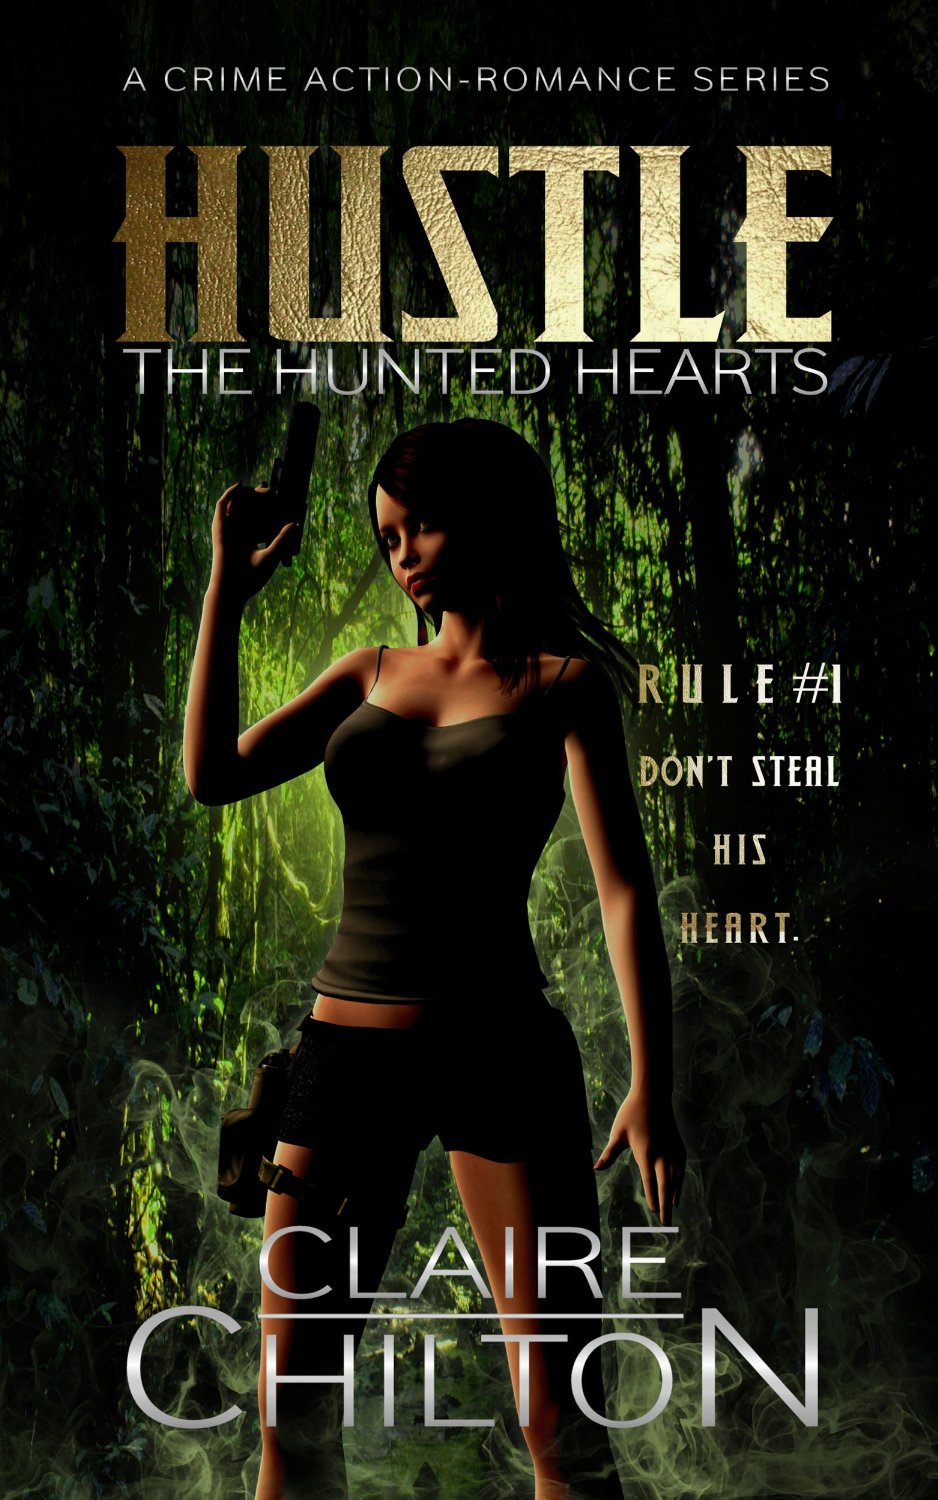 Hustle: A Crime Action-Romance Series (The Hunted Hearts Book 1) by Claire Chilton